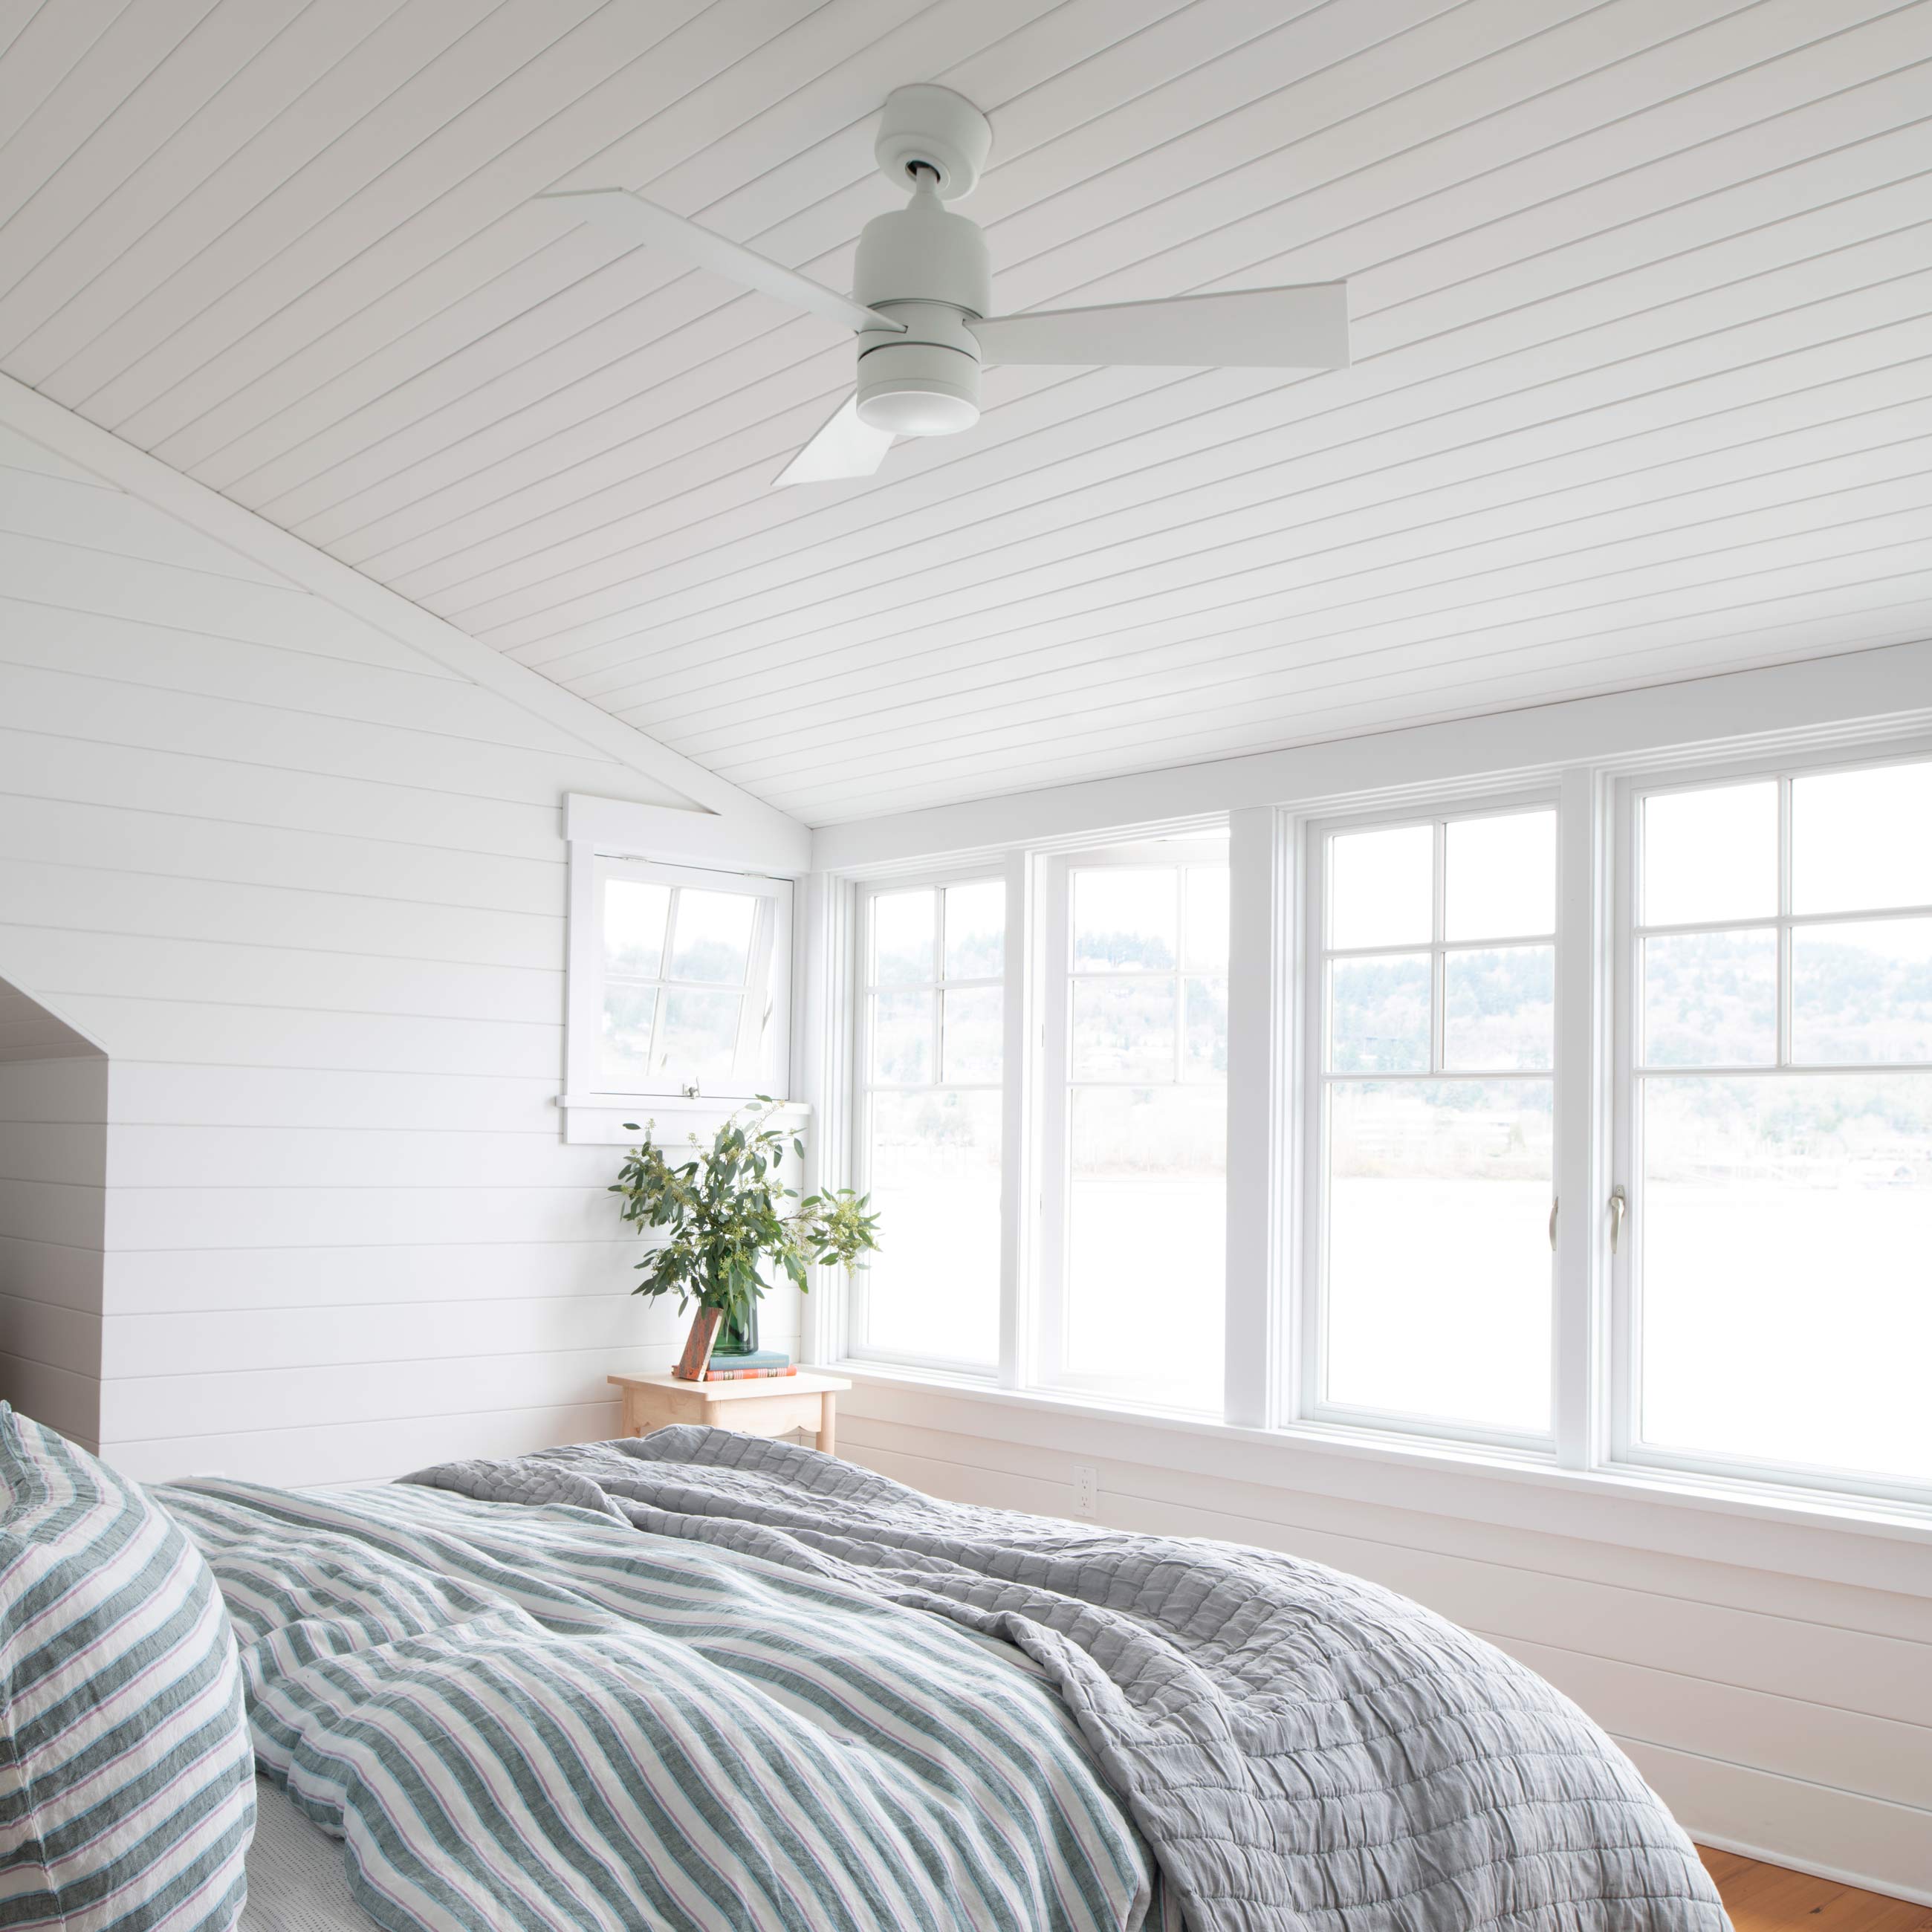 vaulted ceiling fan in bright bedroom